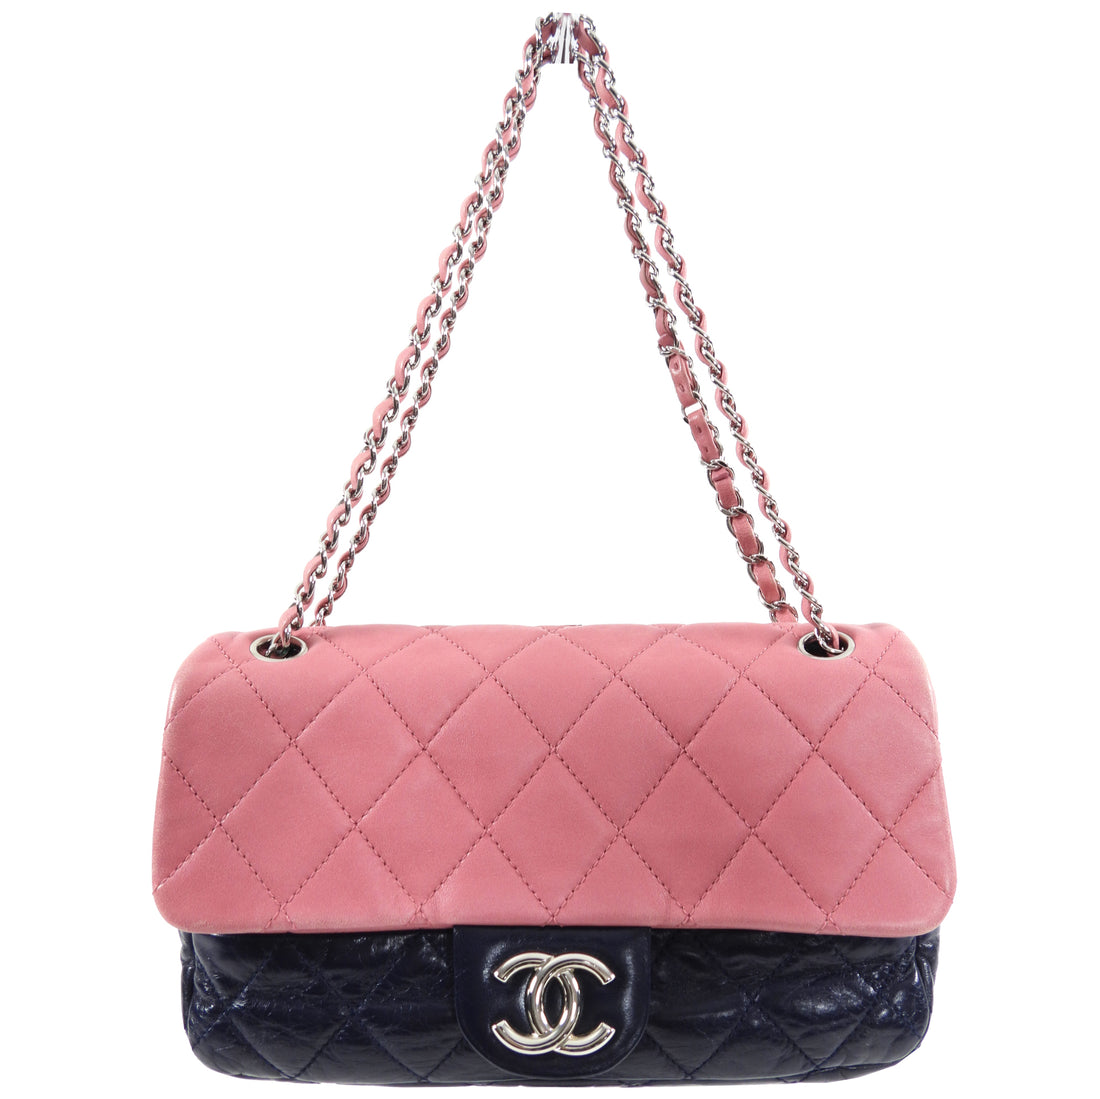 Chanel Pink and Navy Bicolor Quilted Leather Flap Bag – I MISS YOU